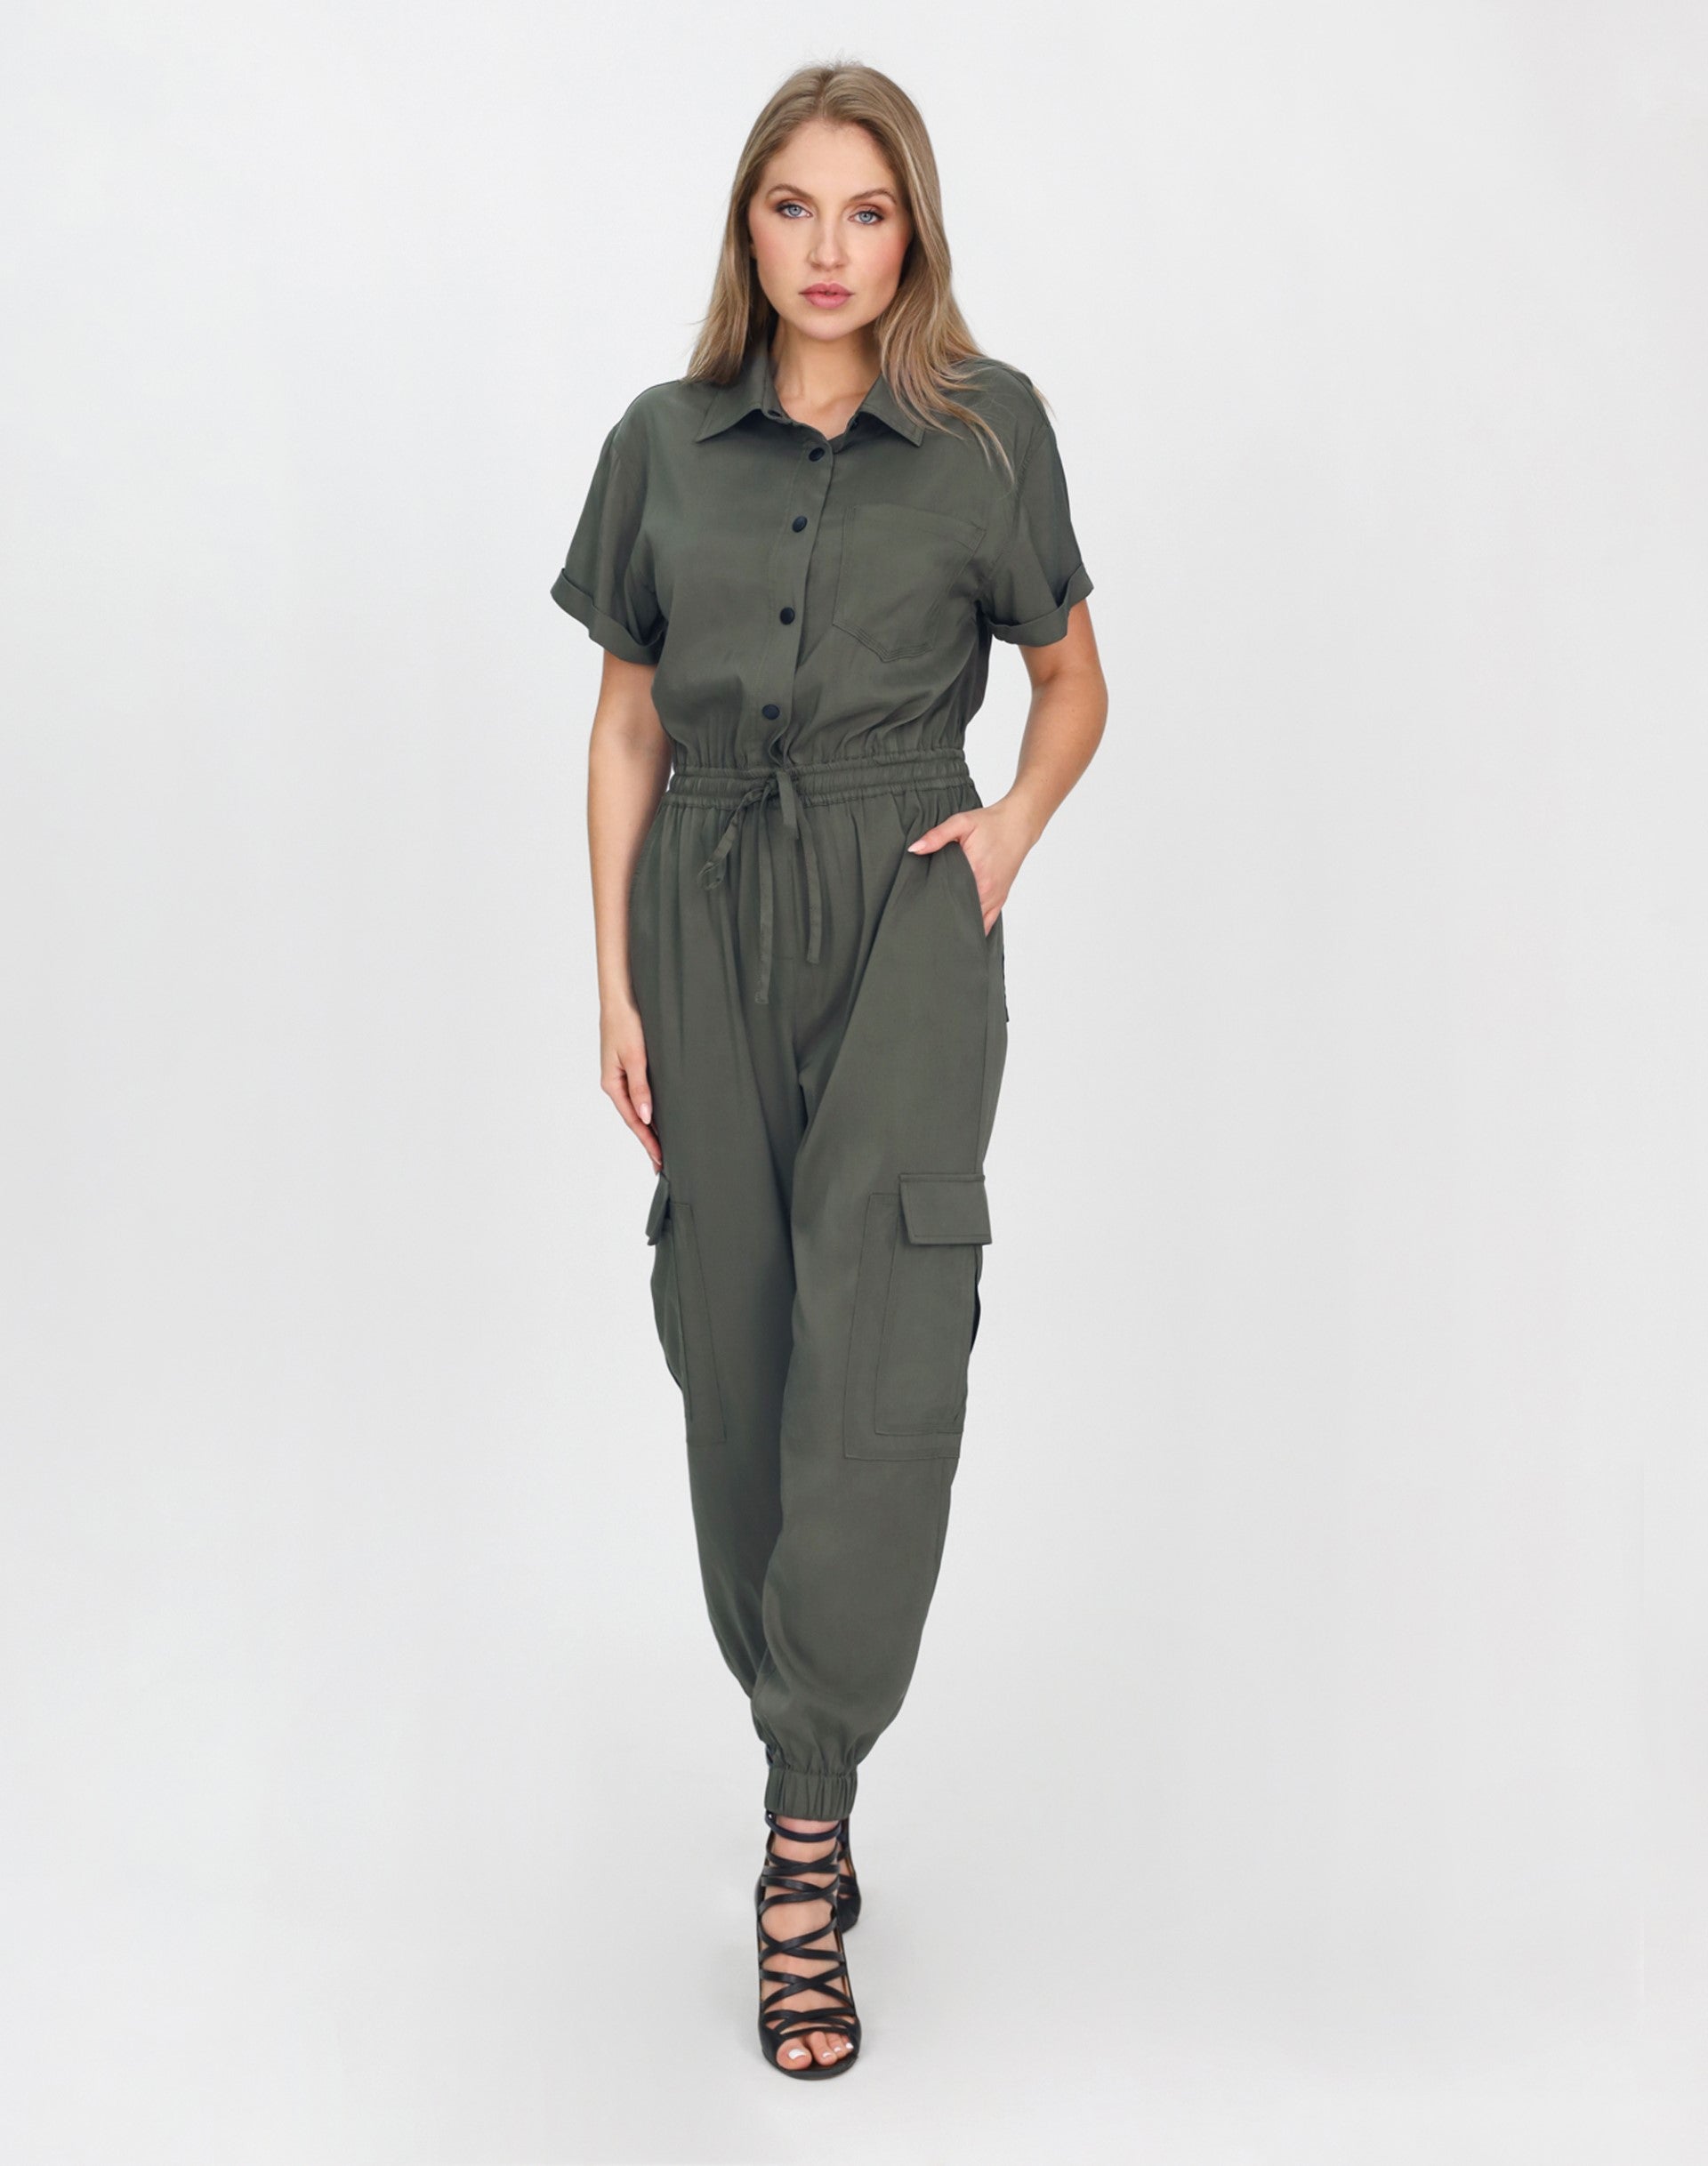 Best jumpsuits for tall women to shop in 2023 | Evening Standard